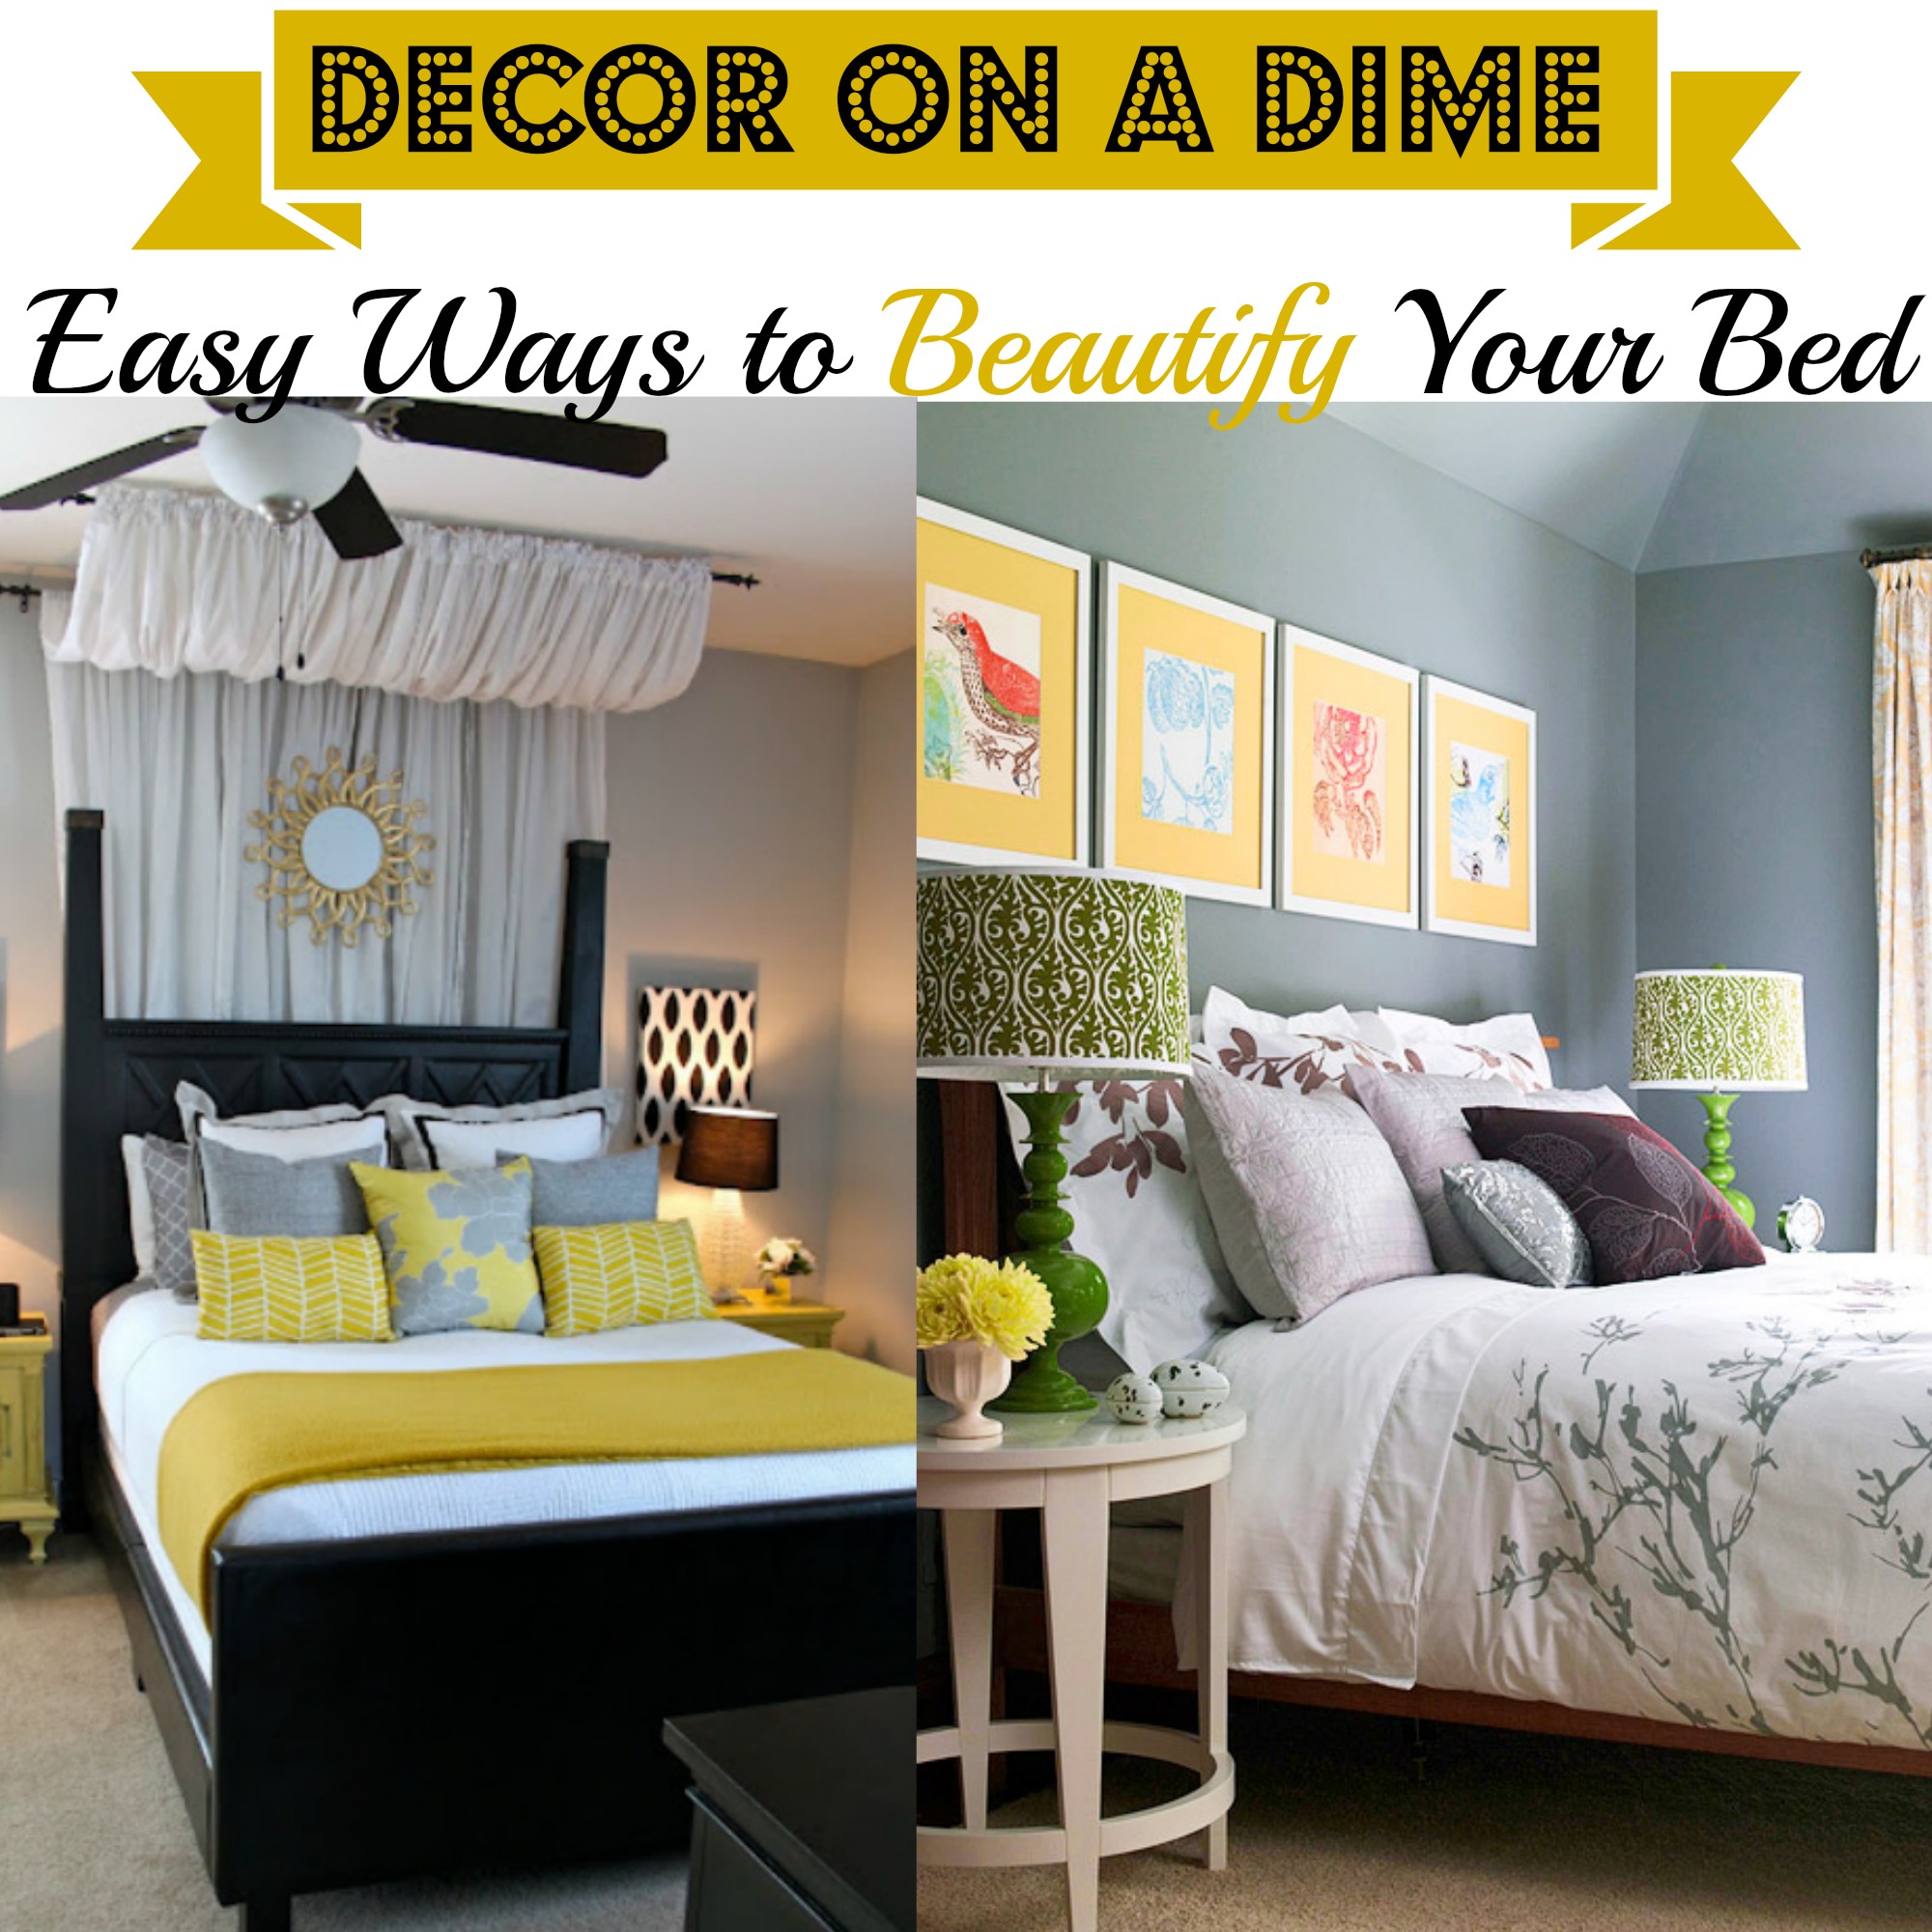 Decor On A Dime Steps To Create A Zen Bedroom Looking Fly On A Dime